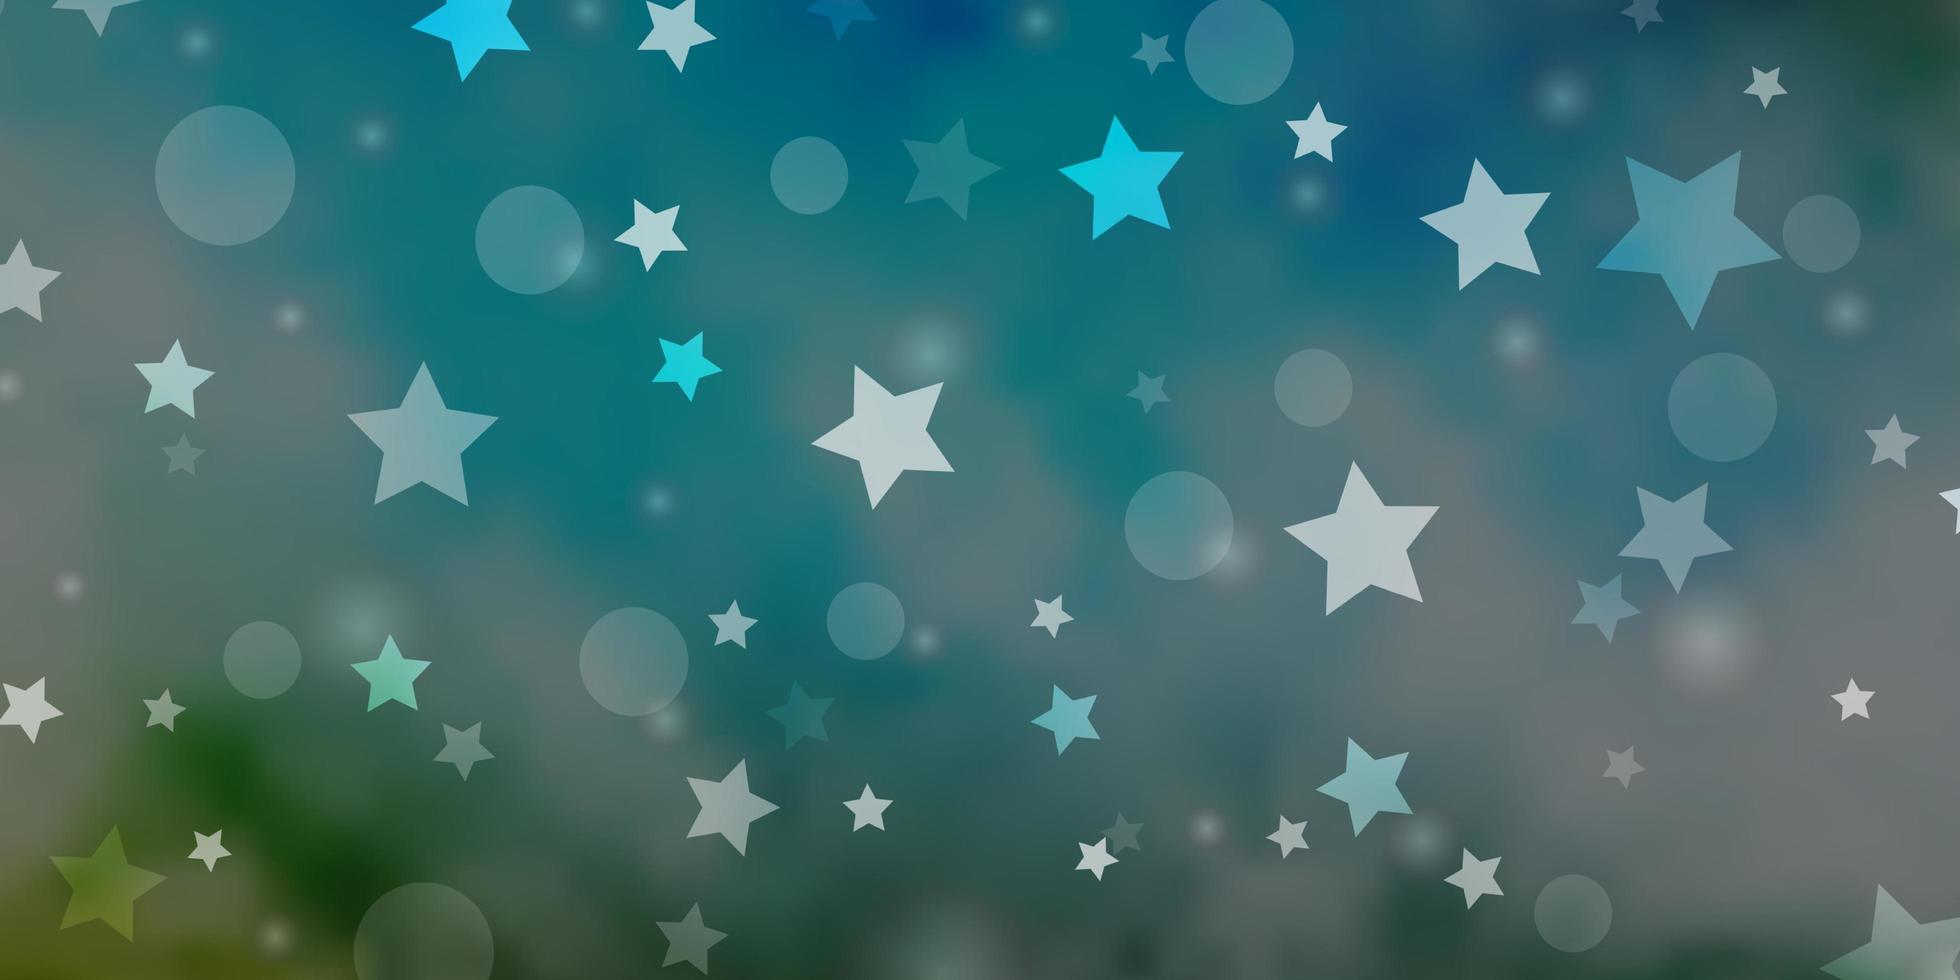 Light Blue, Green vector background with circles, stars